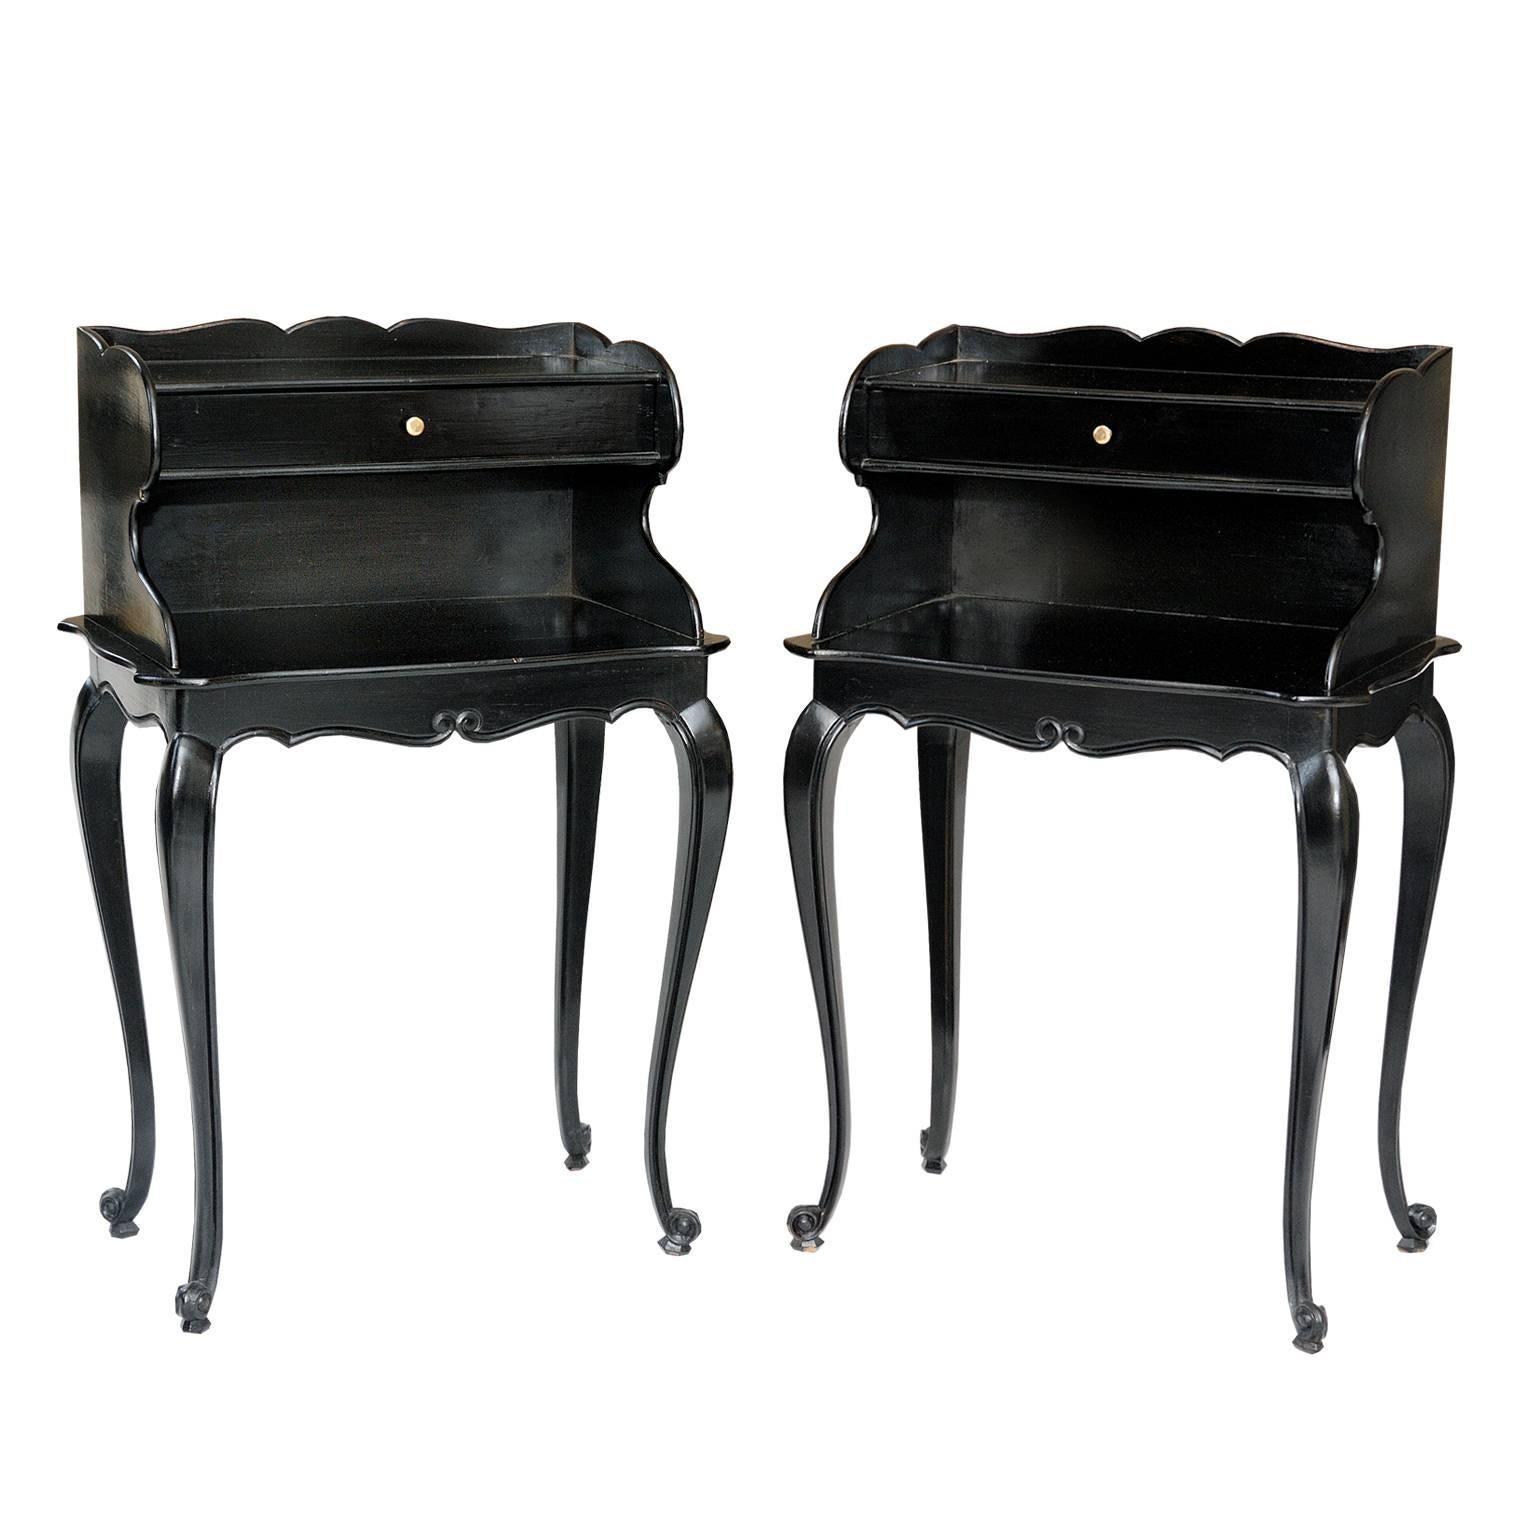 A fine pair of French 18th century style ebonized bedside or night tables with draw to the top and very elegant cabriole legs, circa 1920.
              